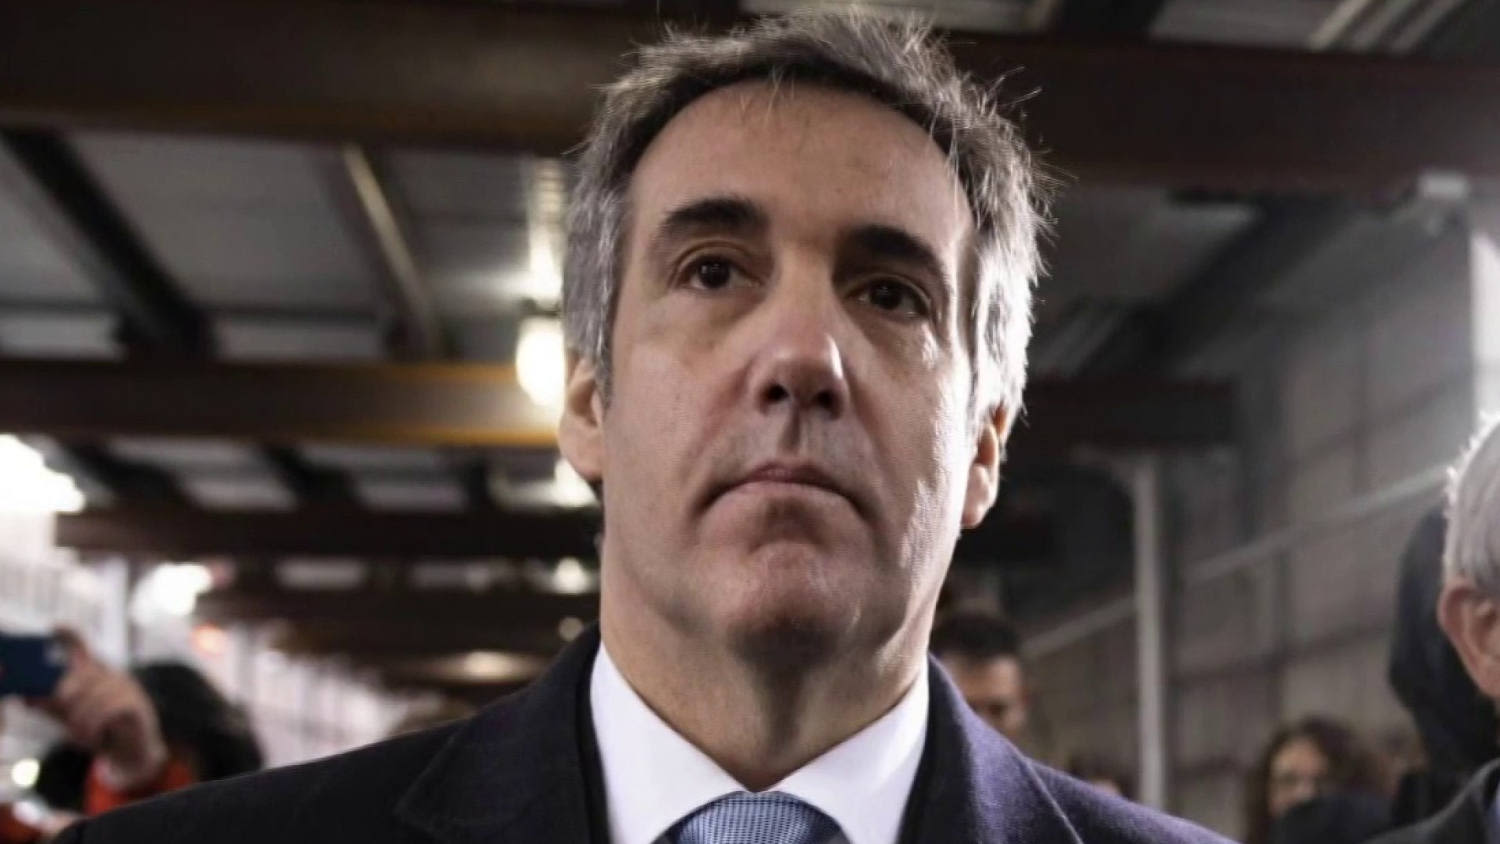 ‘It didn’t land’: Legal experts crush Trump defense performance in Michael Cohen cross-examination